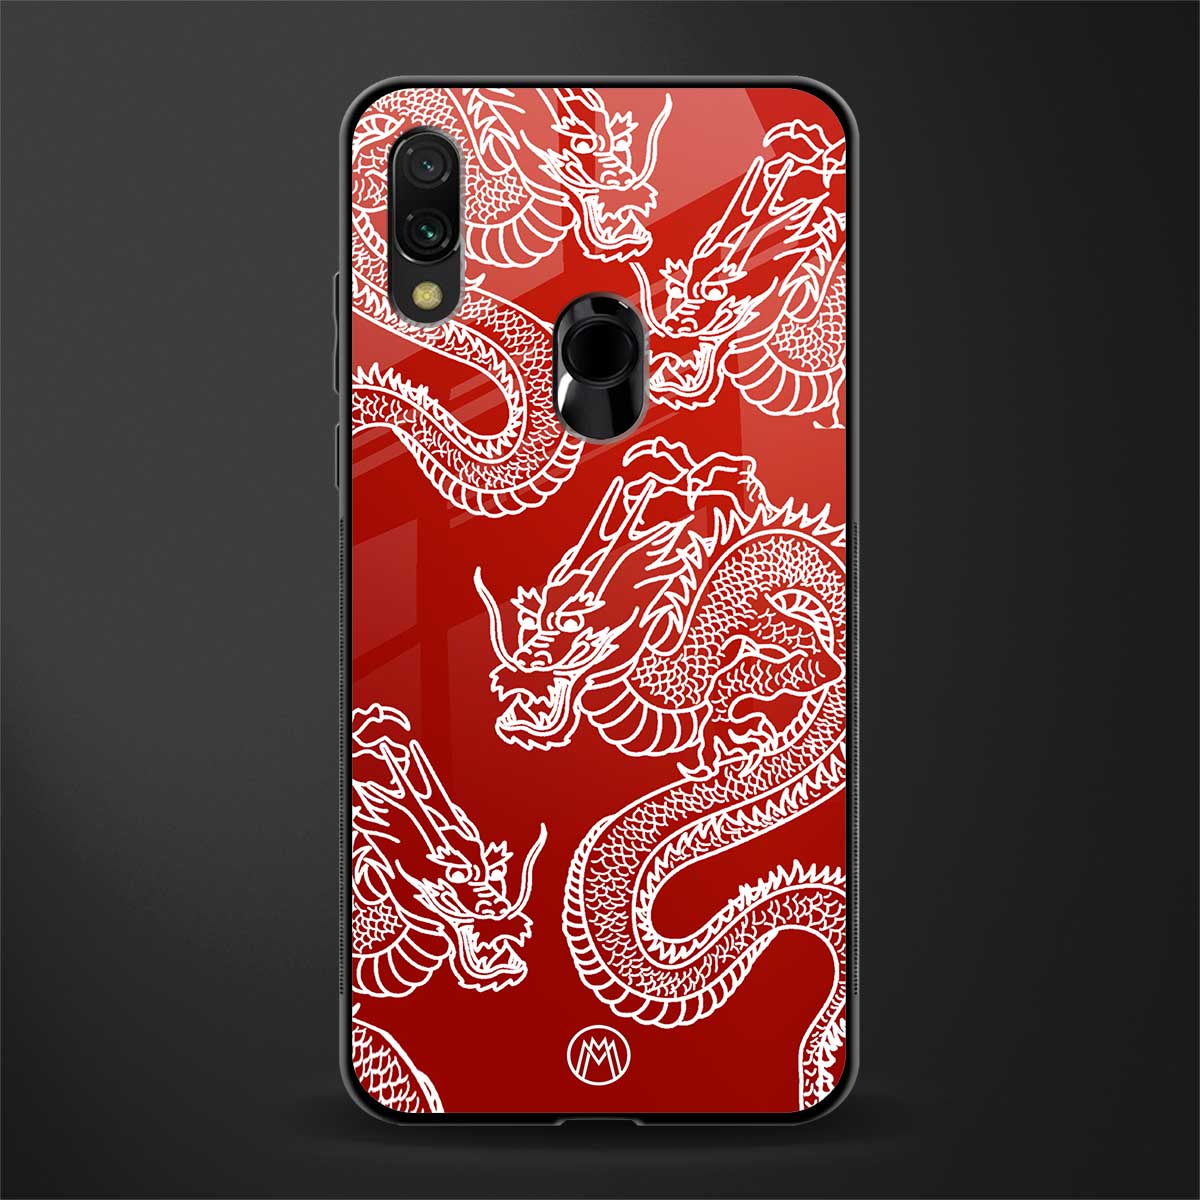 dragons red glass case for redmi note 7 pro image